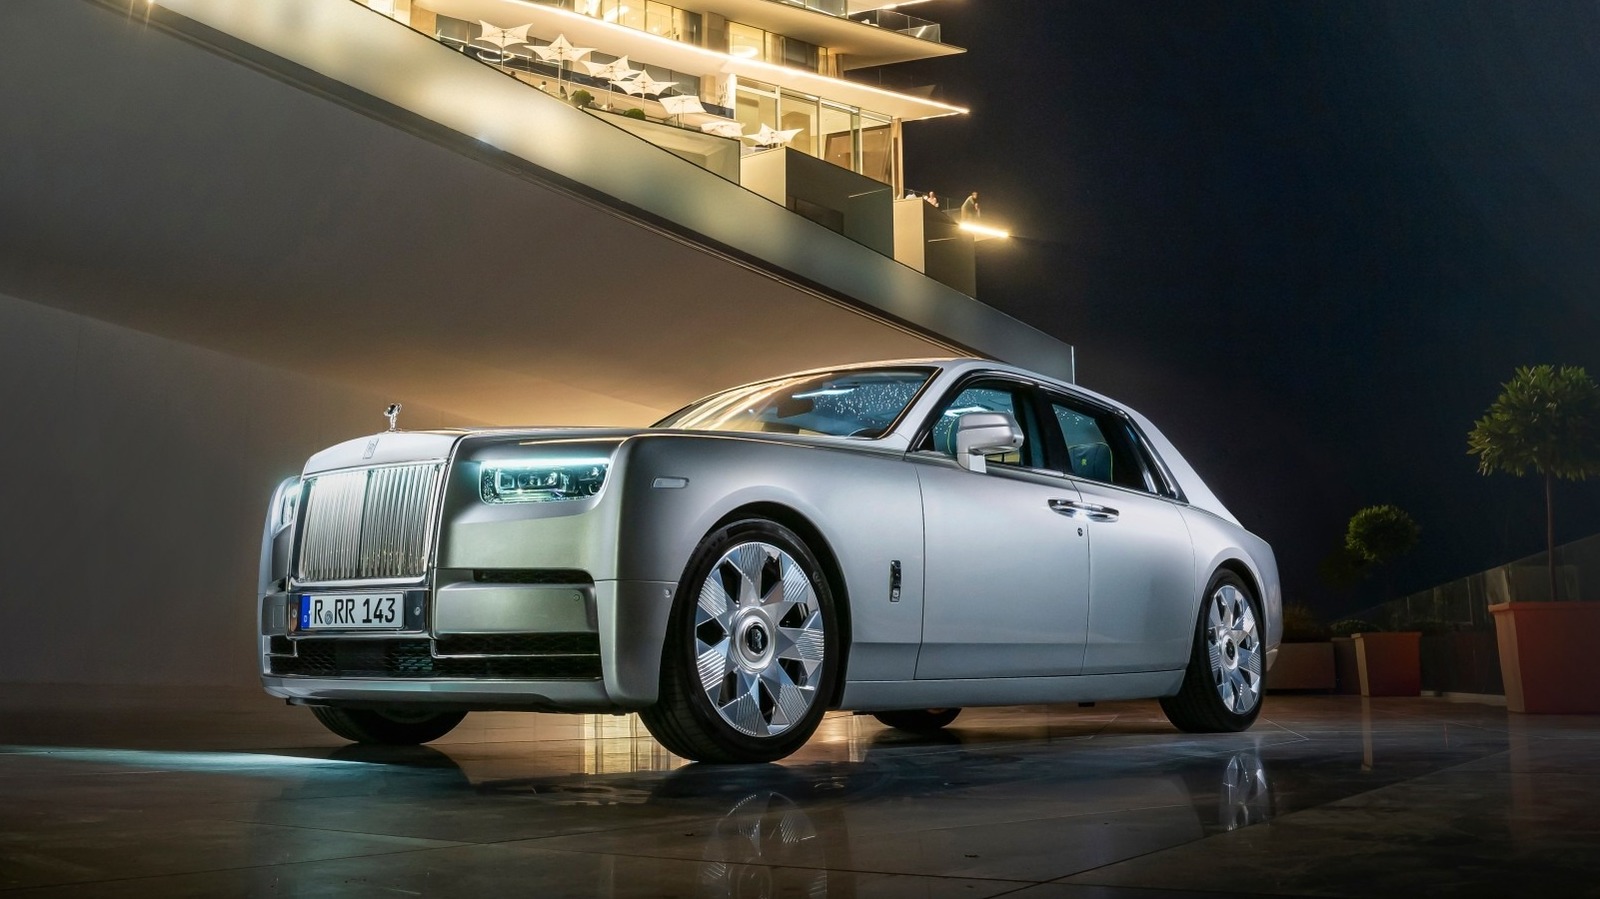 A Look Back At The History Of The Rolls-Royce Phantom